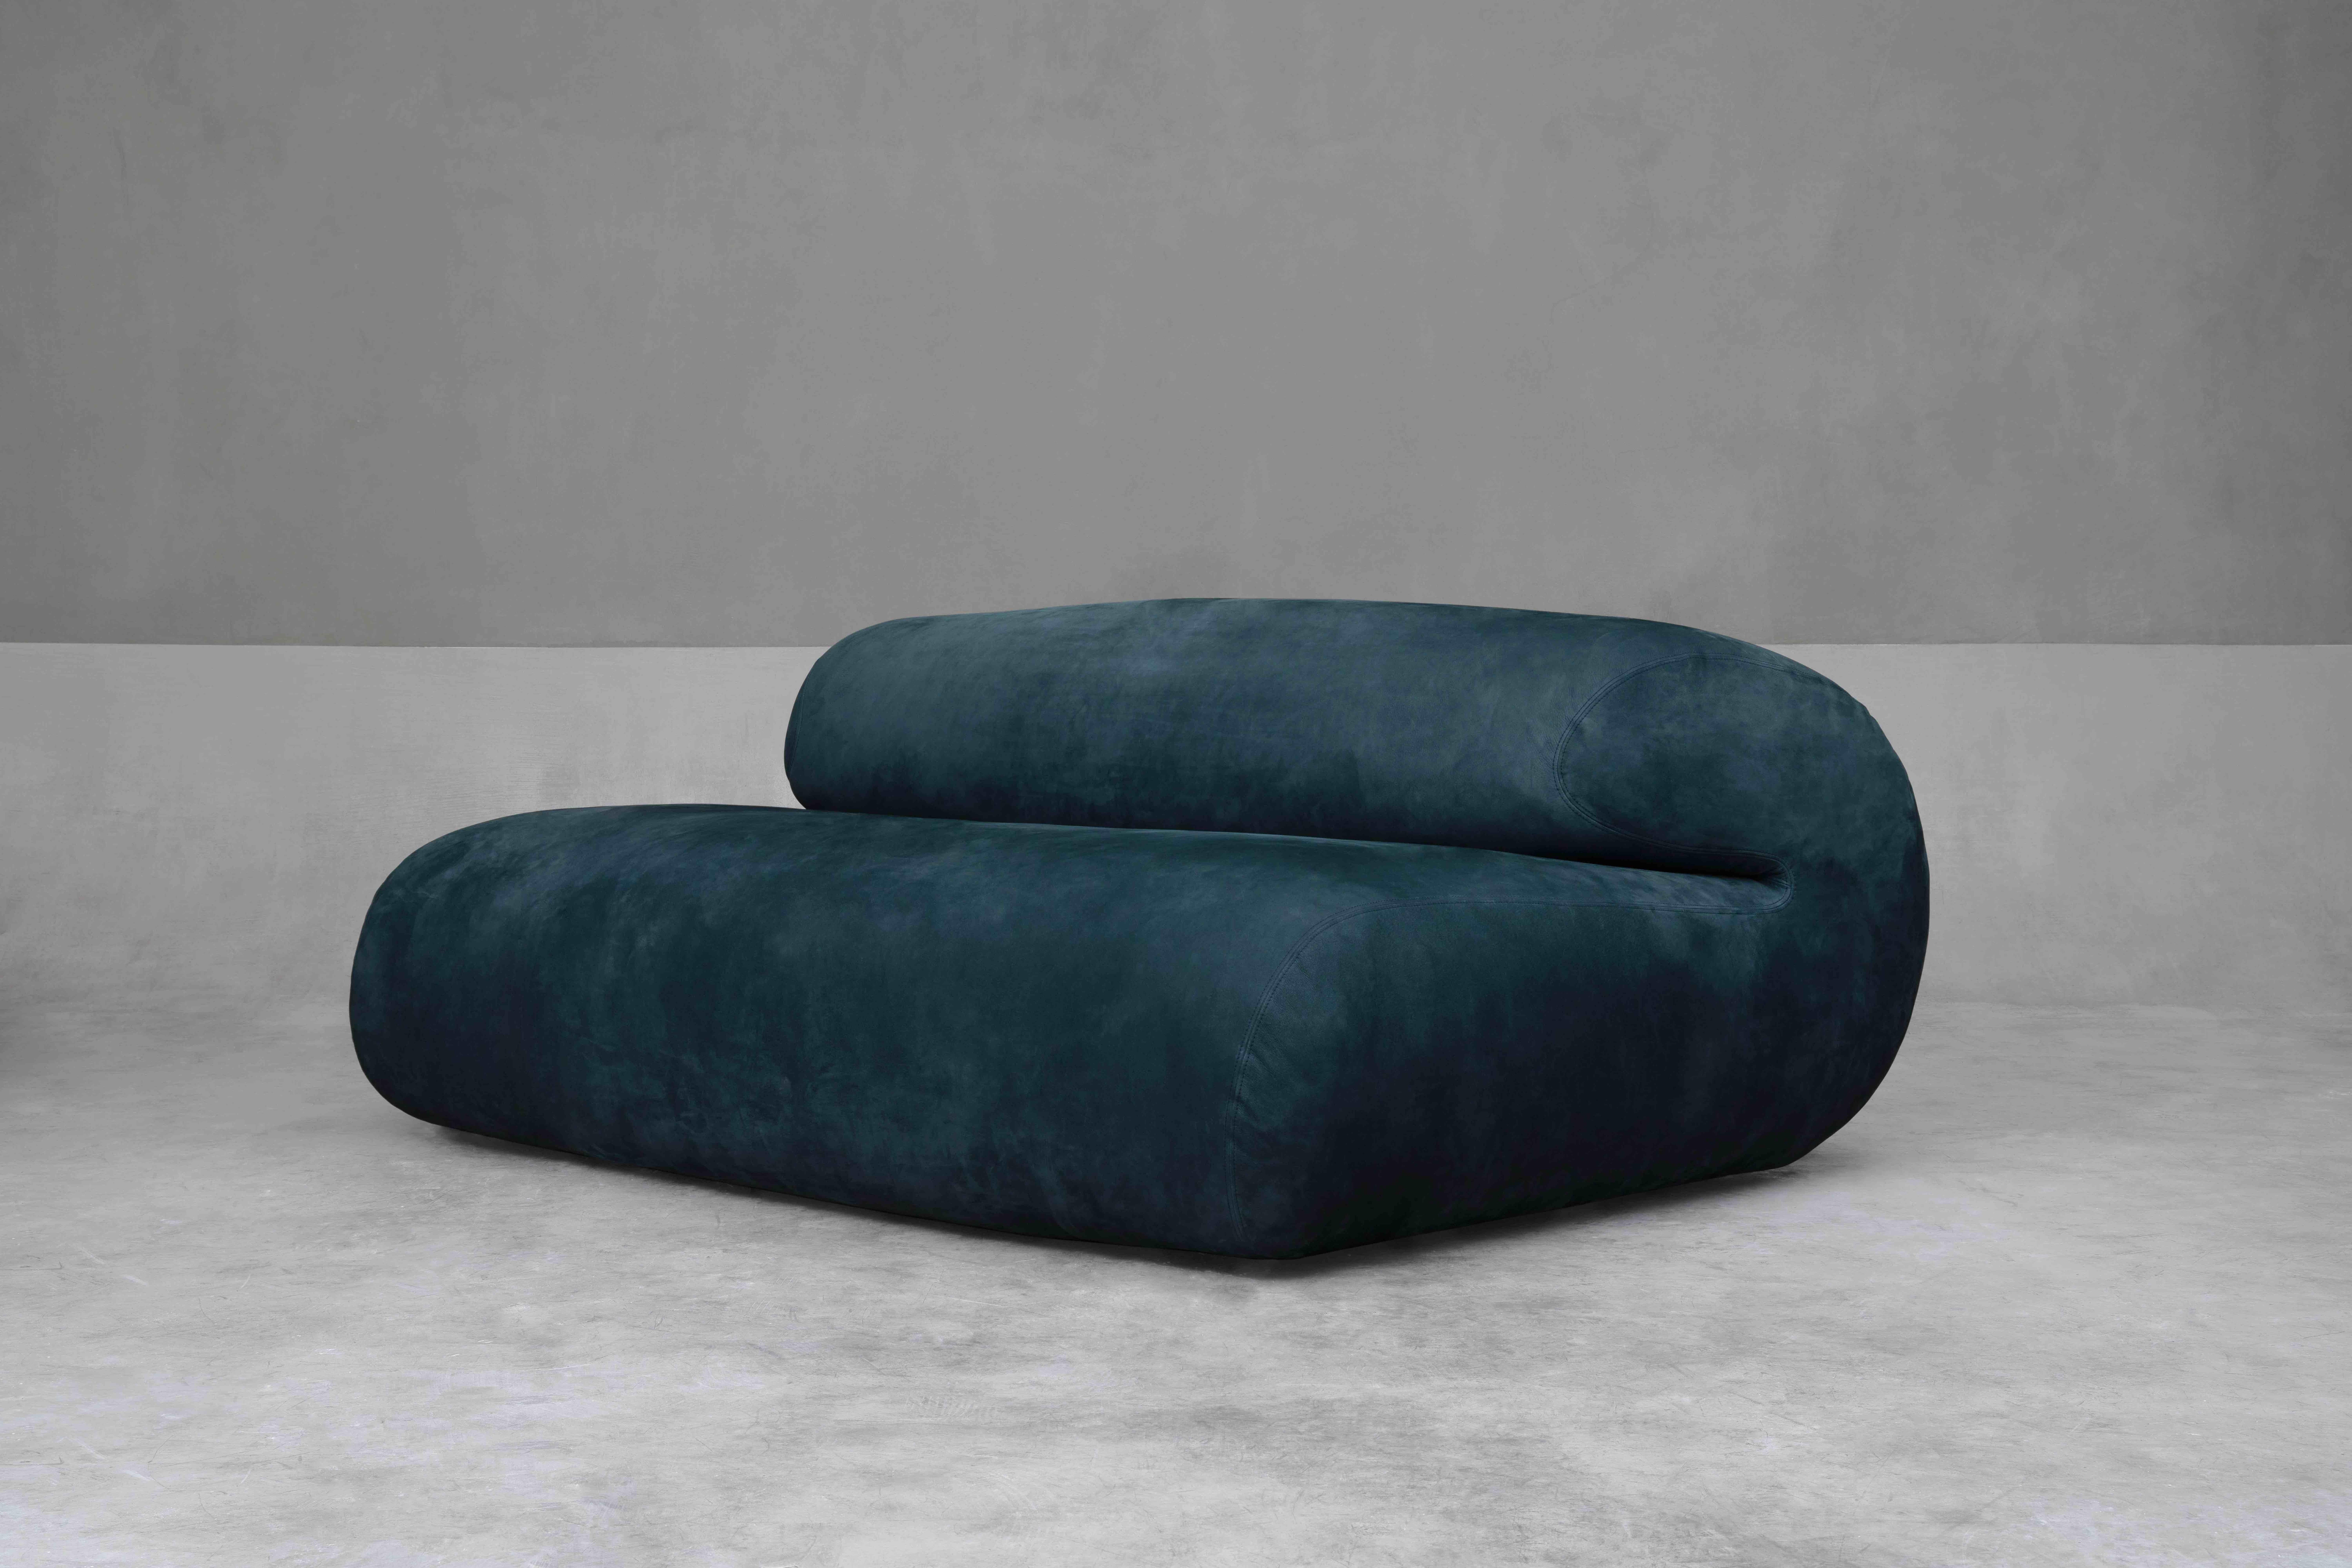 The Strata is a two-seater sofa with a distinct expression of relaxation. It is a simplistic yet bold movement balancing the inner force of upholstery with the external forces of gravity, which results in a shape that could be the objectification of